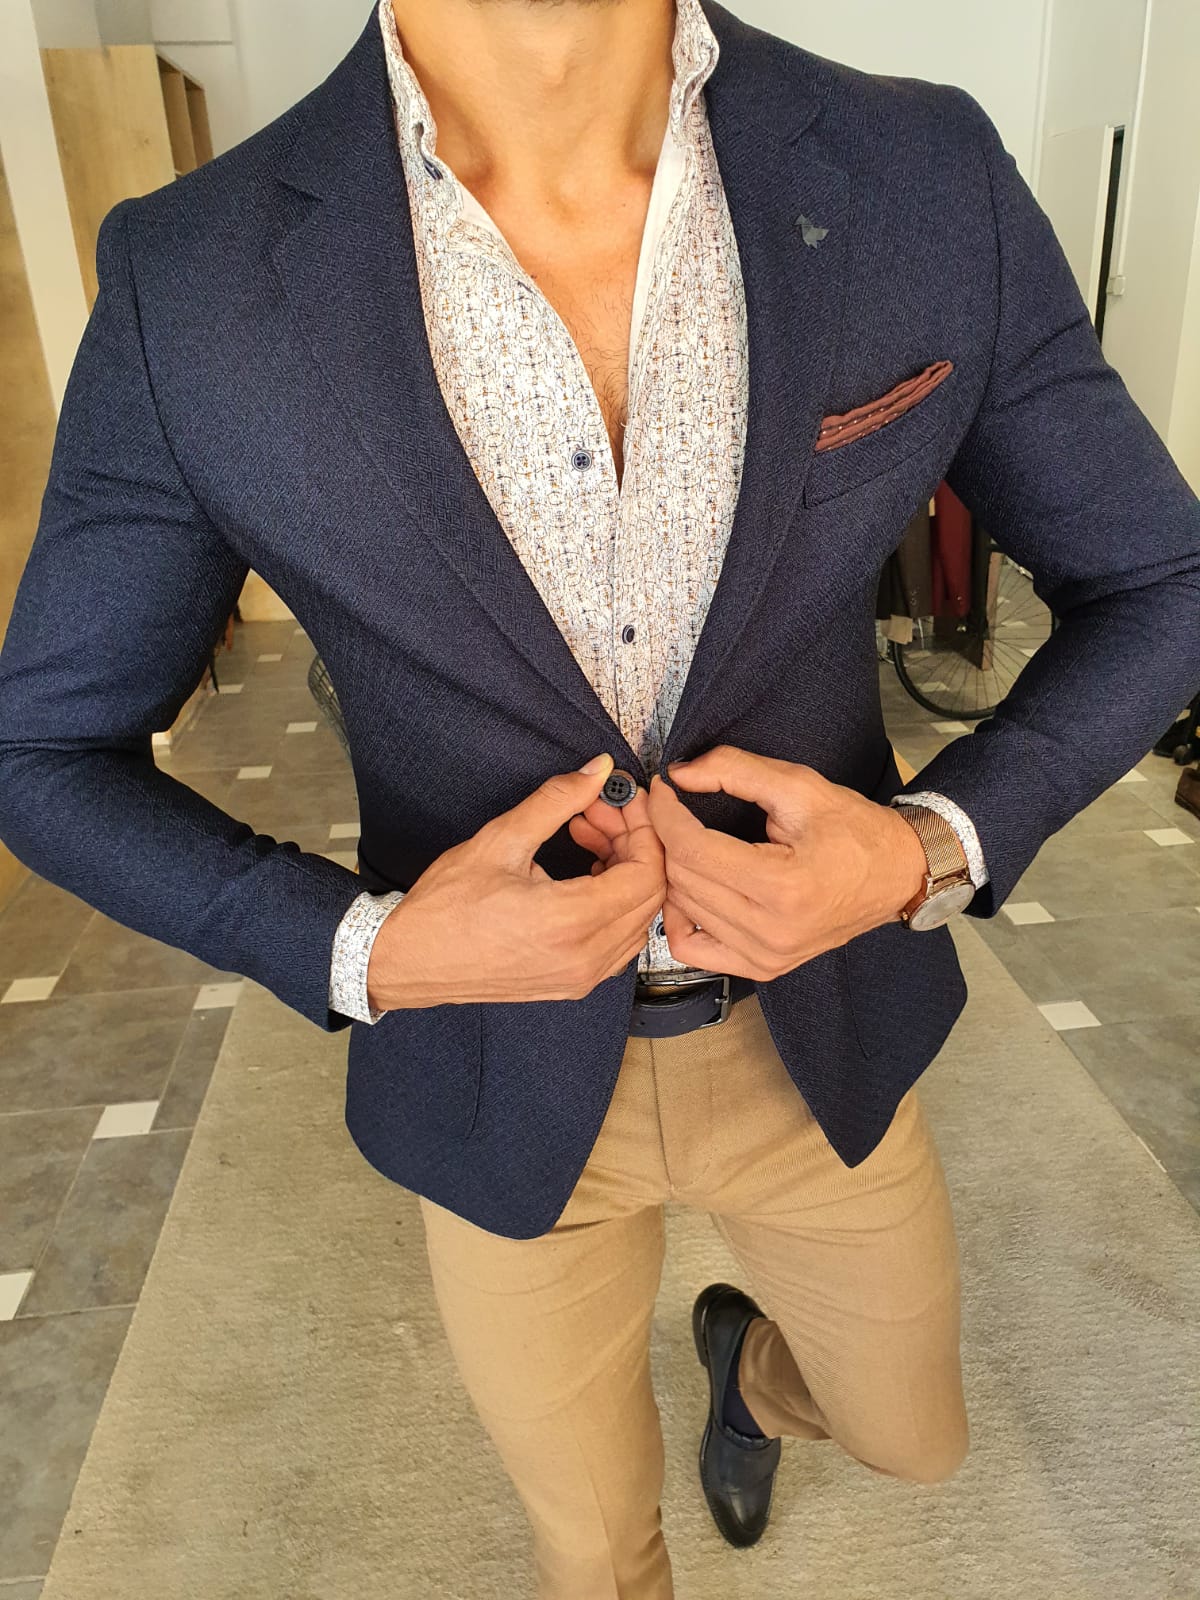 Pocket Squares Can Turn Your Boring Suit Into a Sartorial Stunner by GentWith Blog